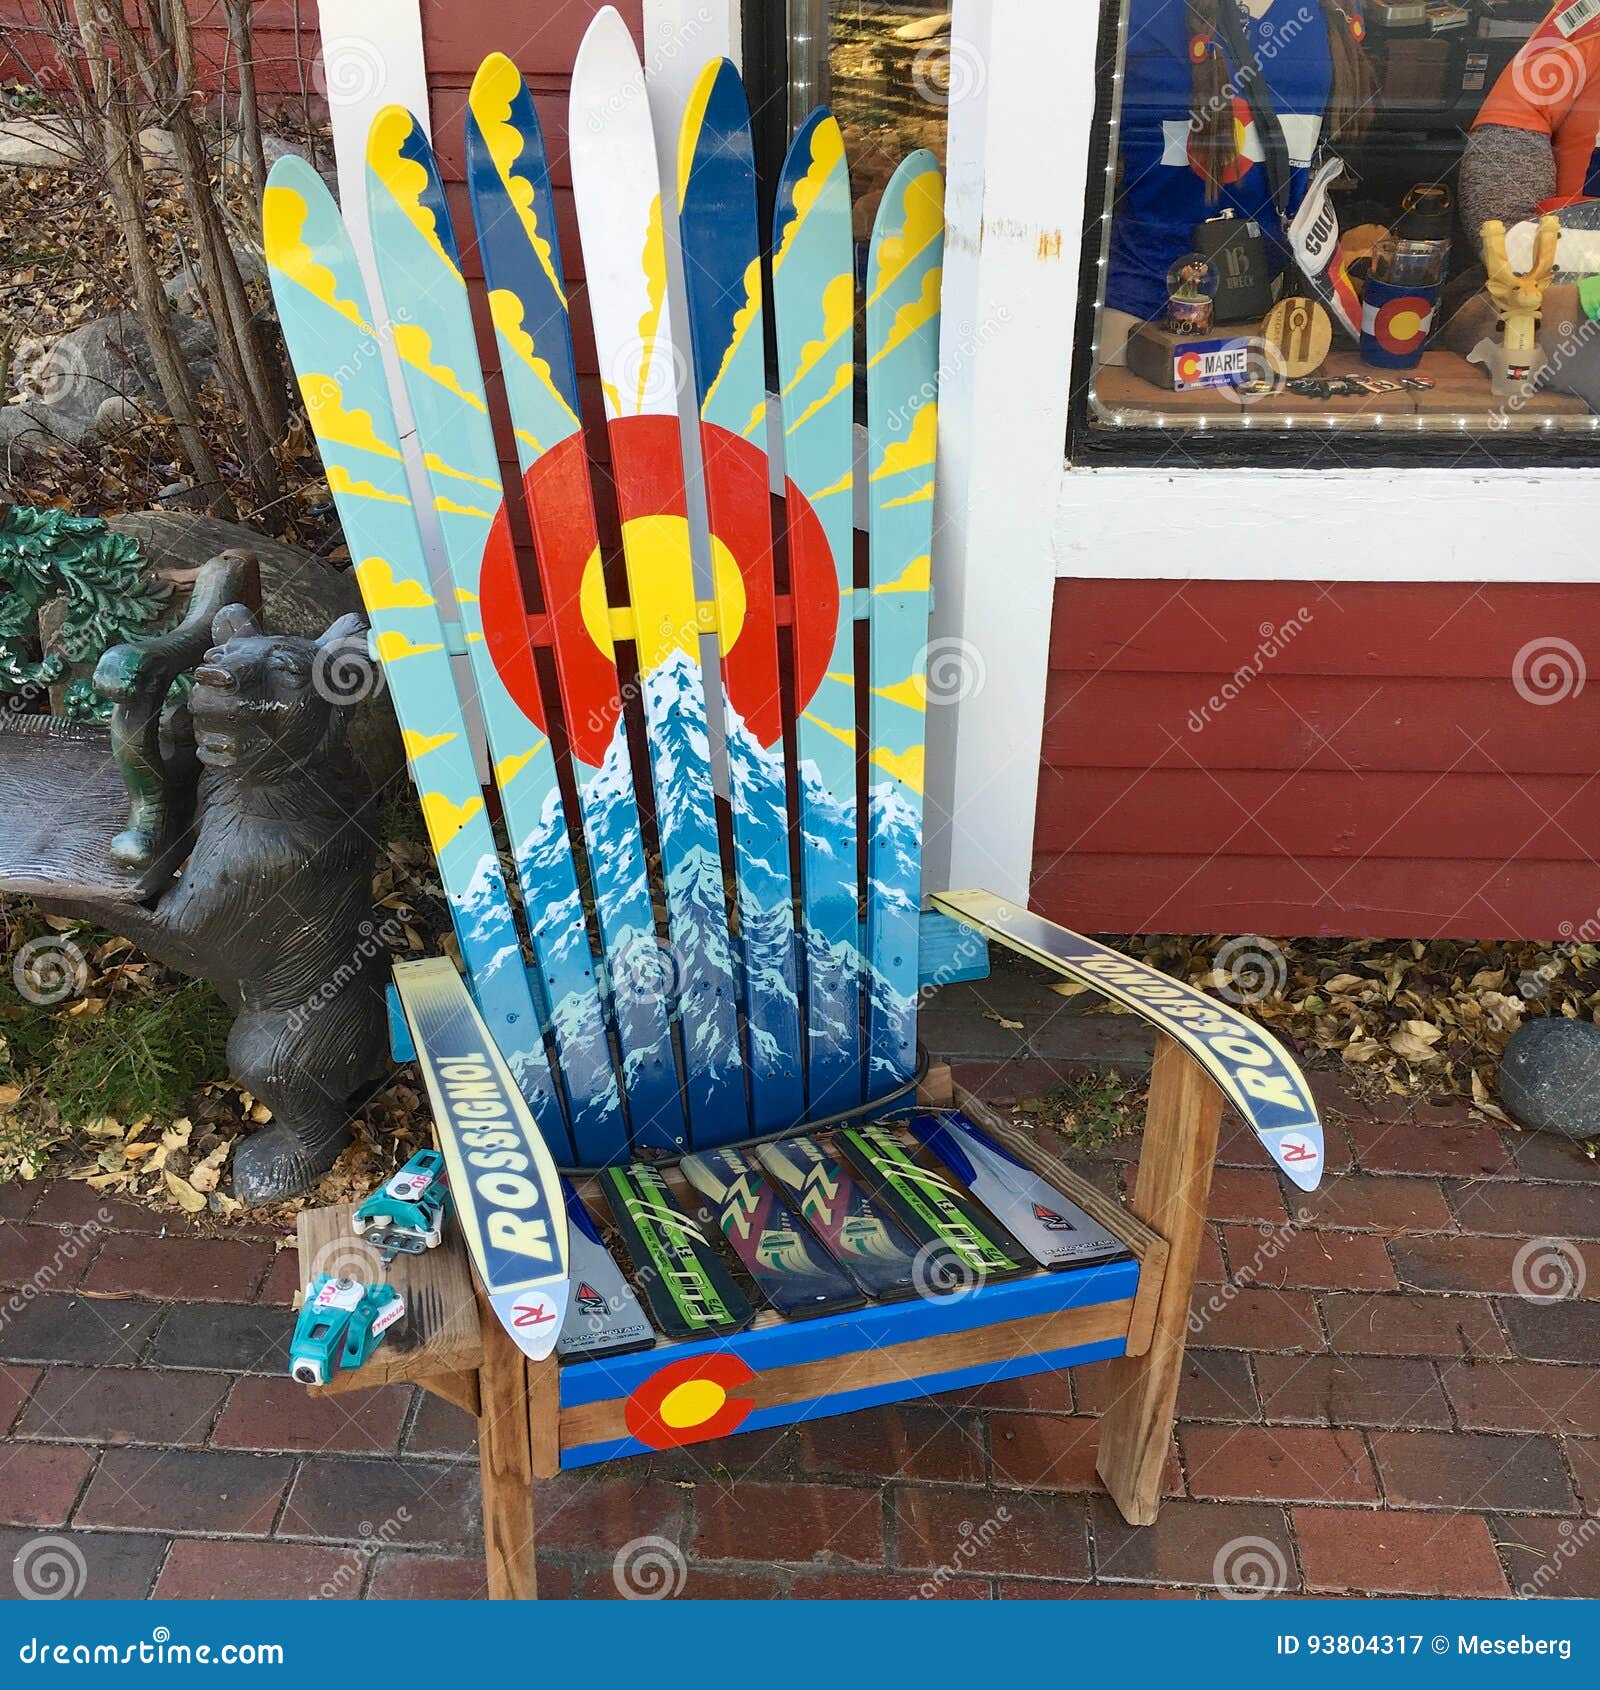 Adirondack Chair Made Of Used Skis Editorial Photography Image